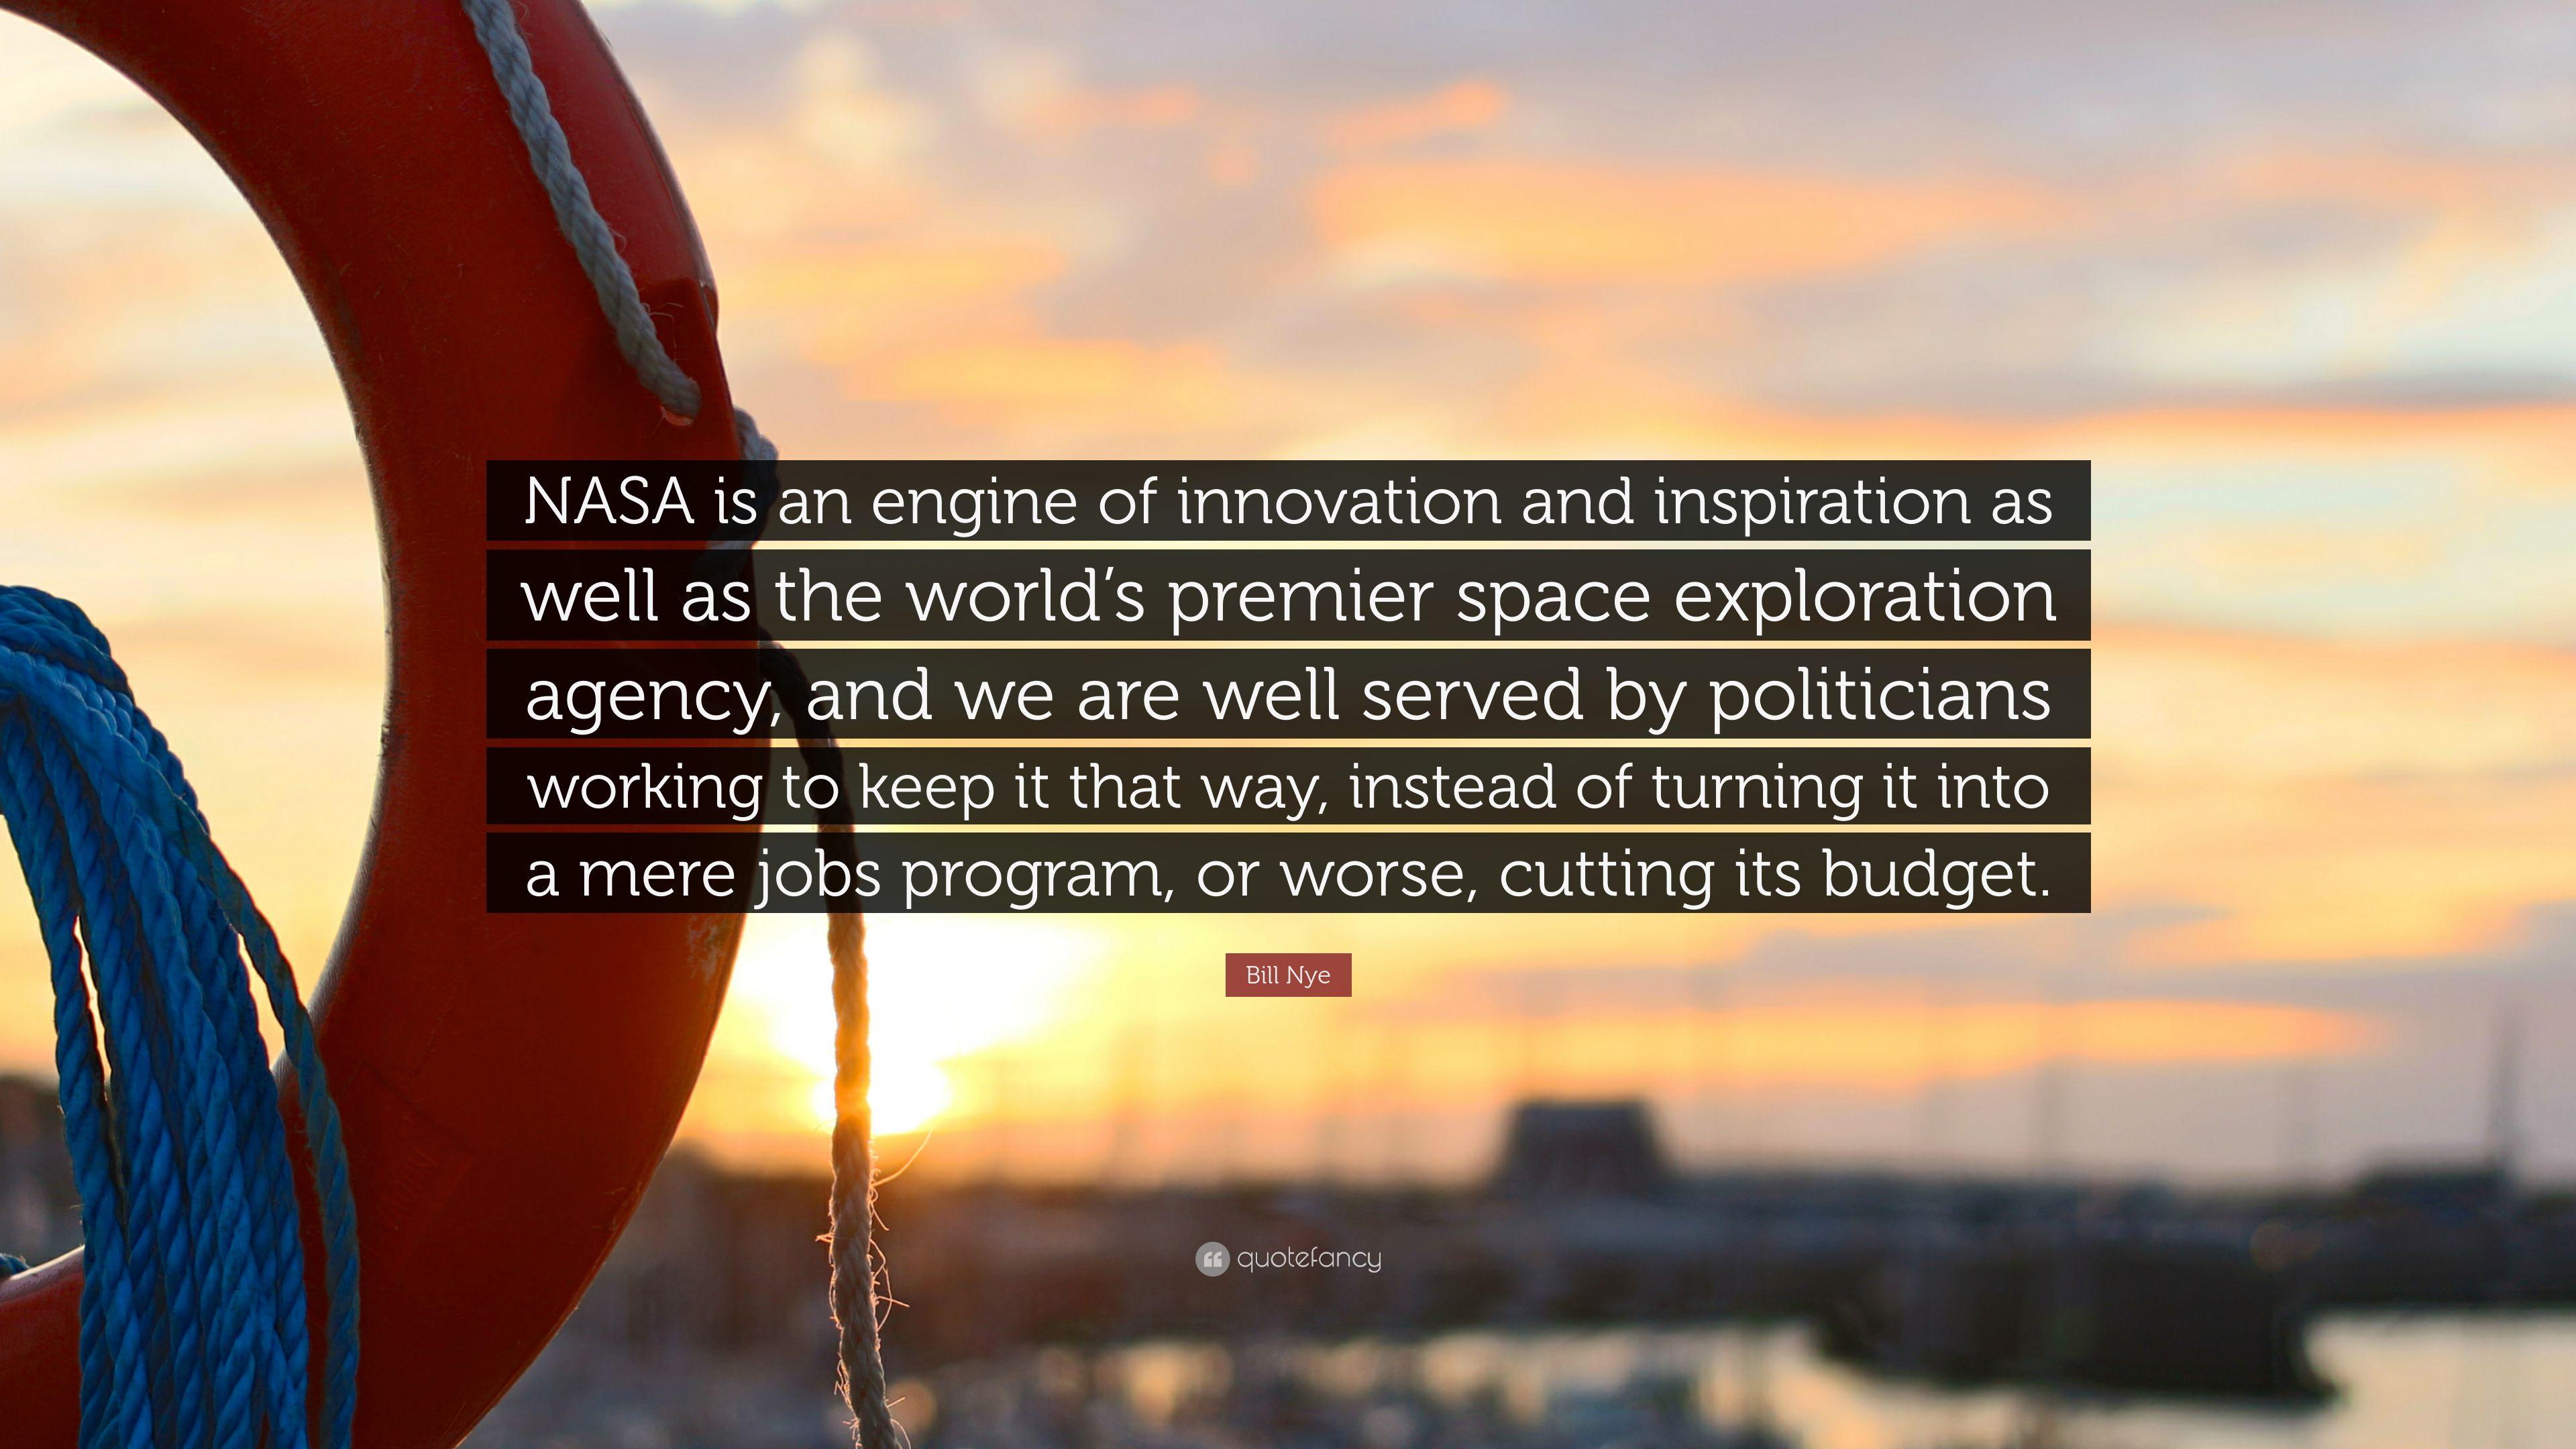 Bill Nye Quote: “NASA is an engine of innovation and inspiration